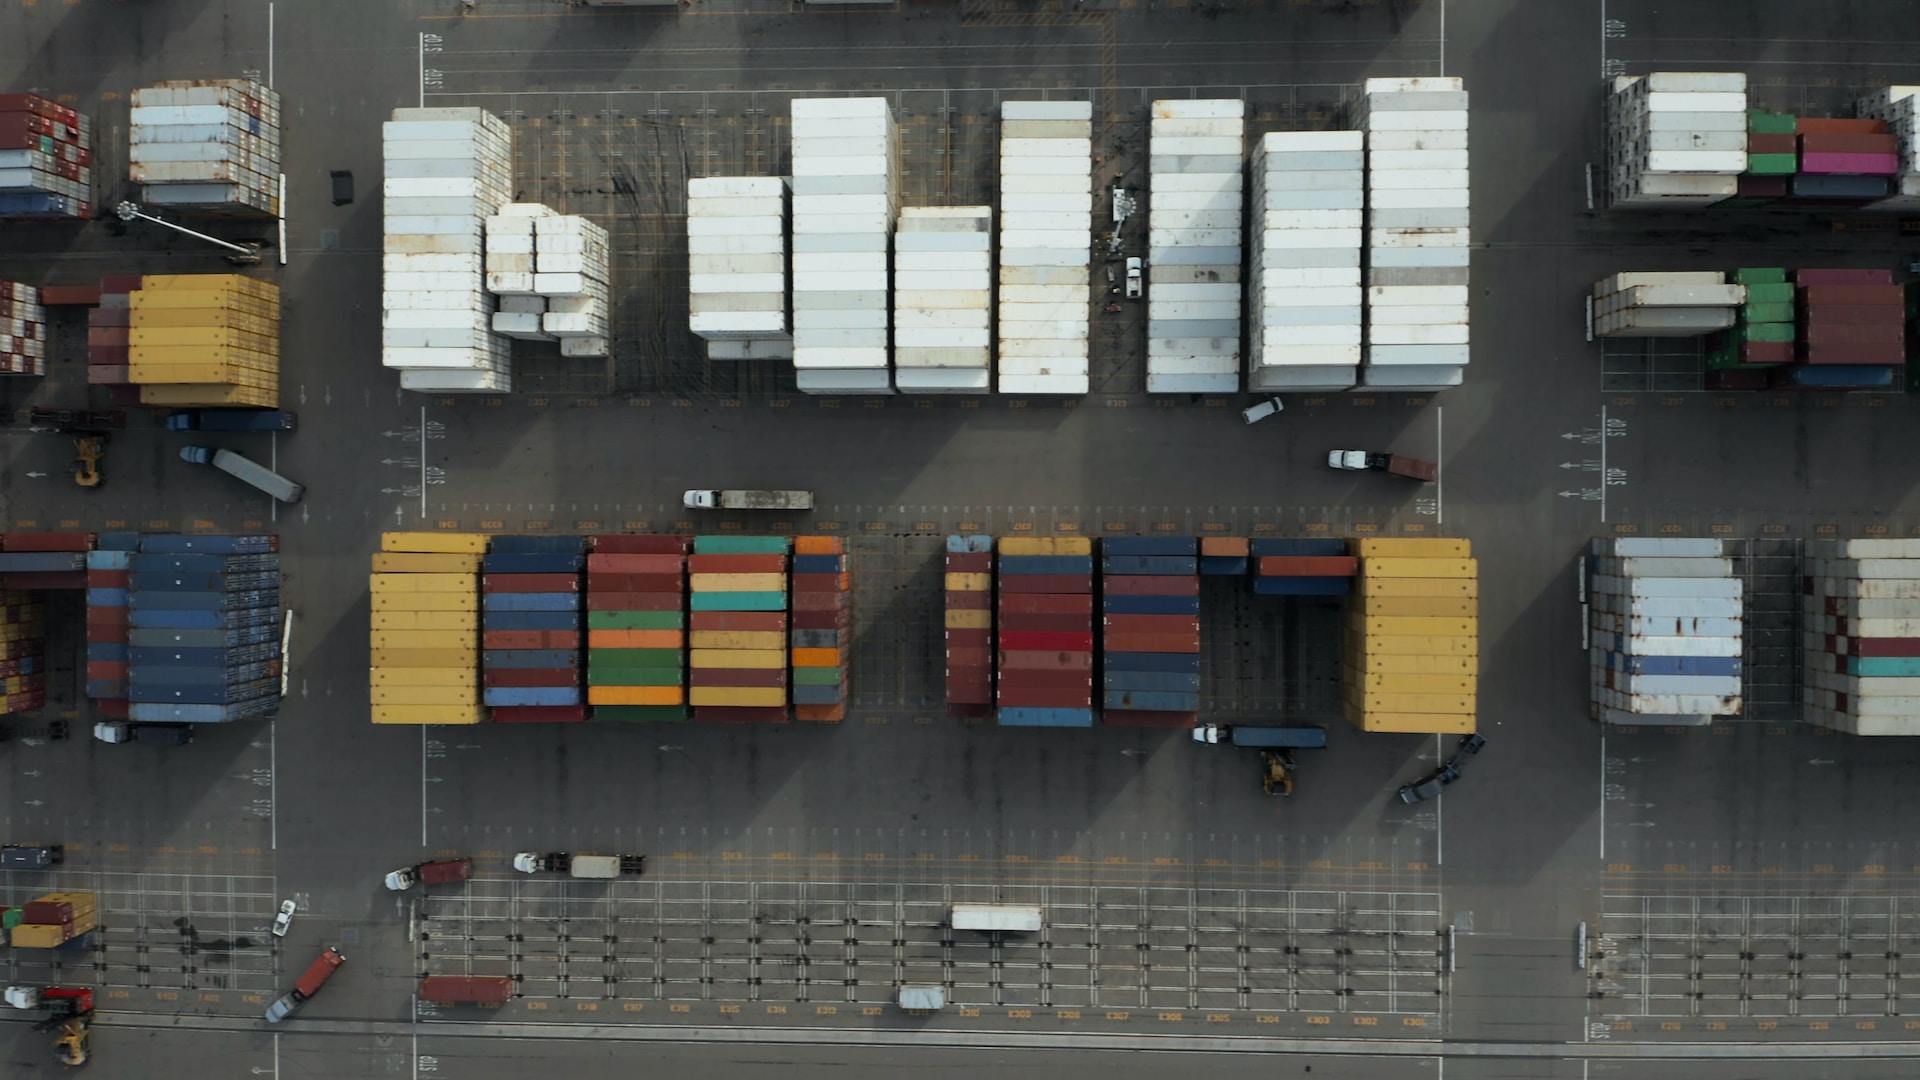 Strategies for Exporters to Enhance Efficiency and Profitability in Global Supply Chains: Blog Post from the International Trade Council